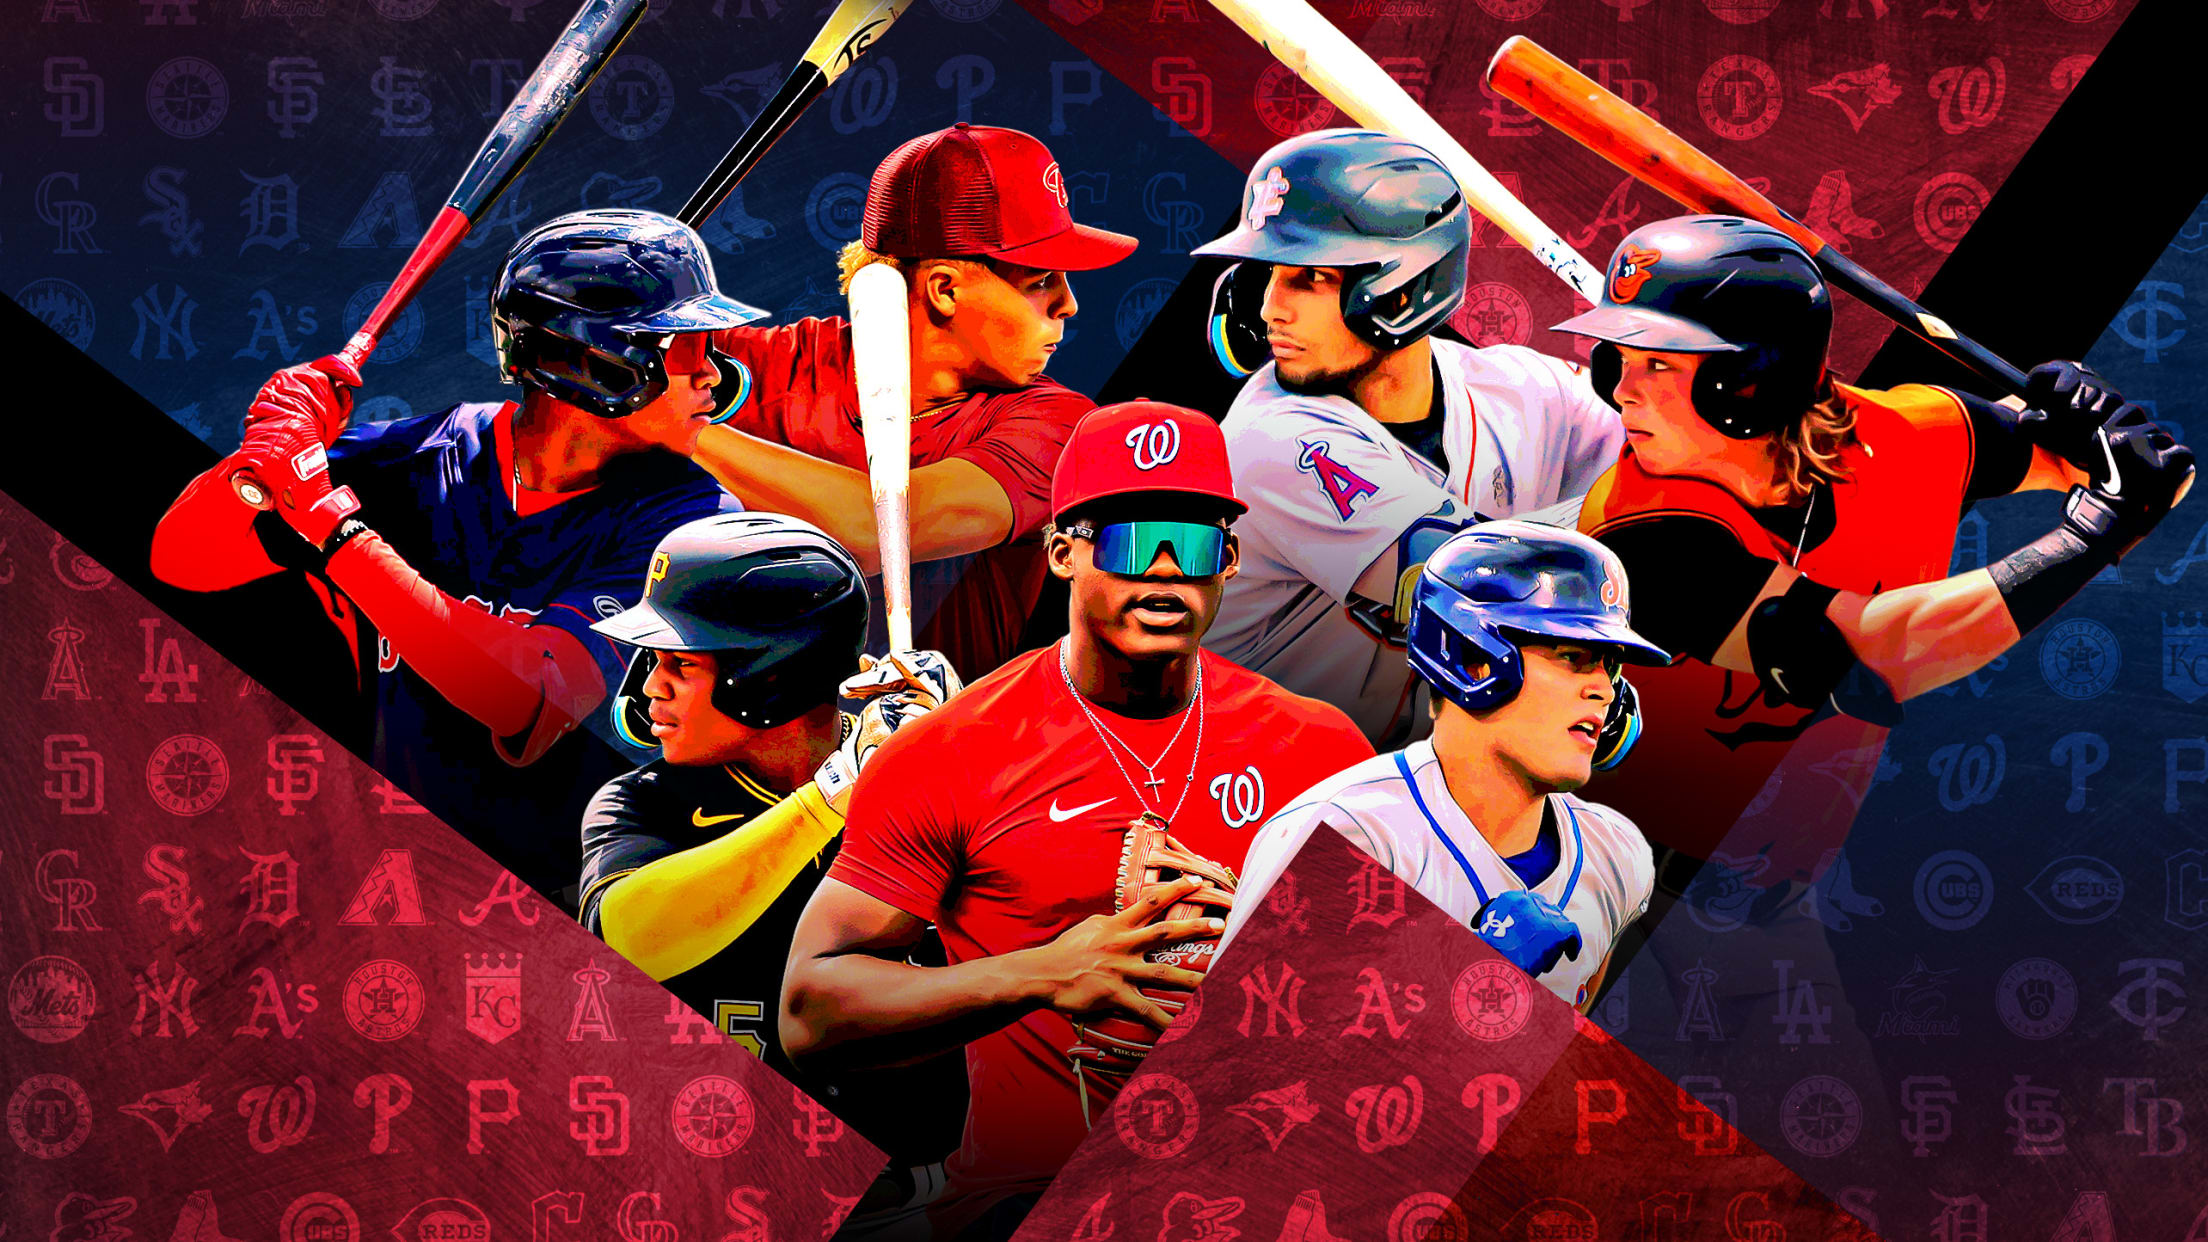 A photo illustration of seven prospects against a background of red and blue shapes containing MLB team logos